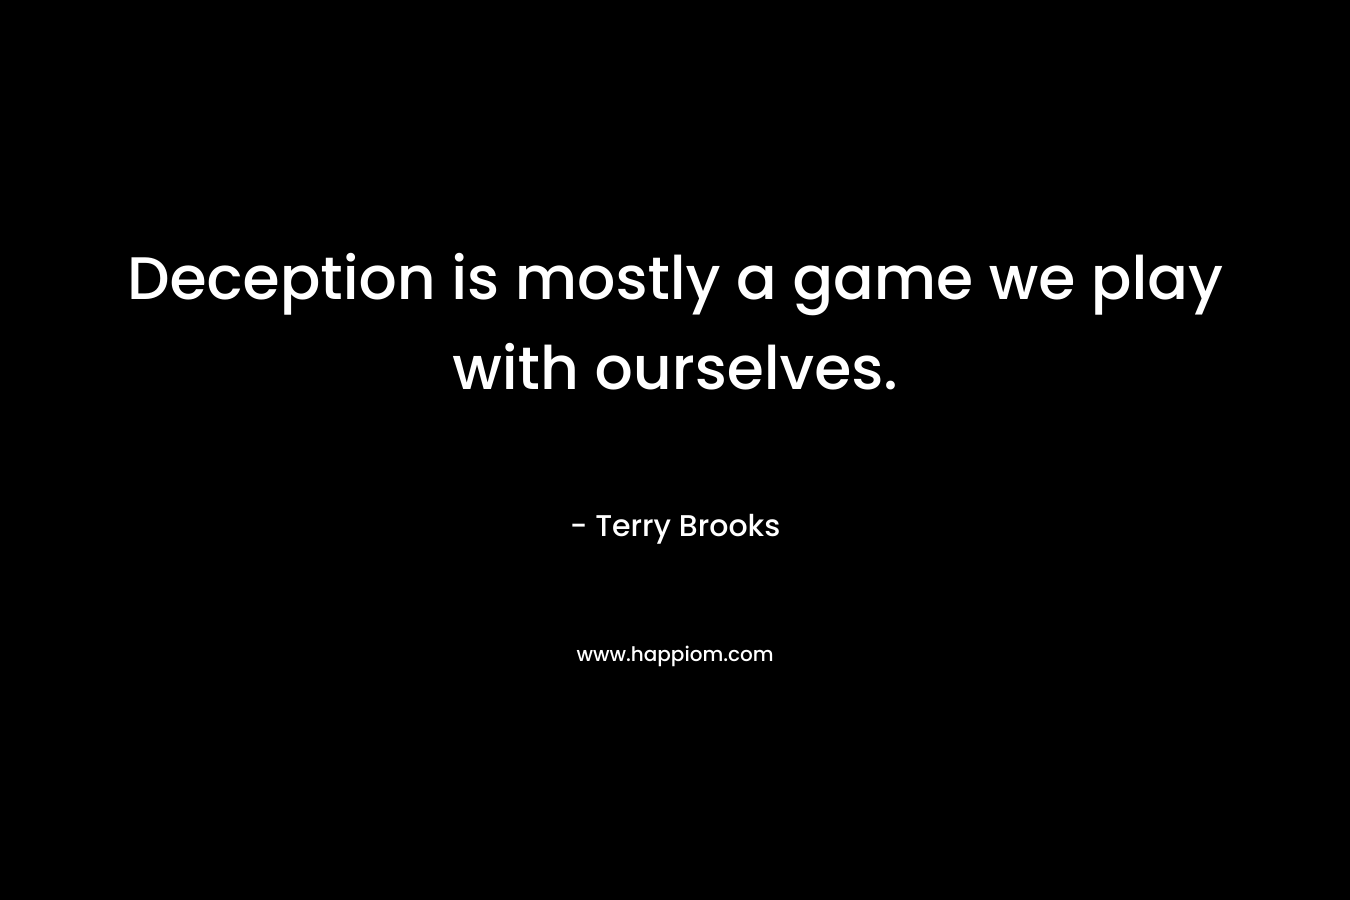 Deception is mostly a game we play with ourselves. – Terry Brooks